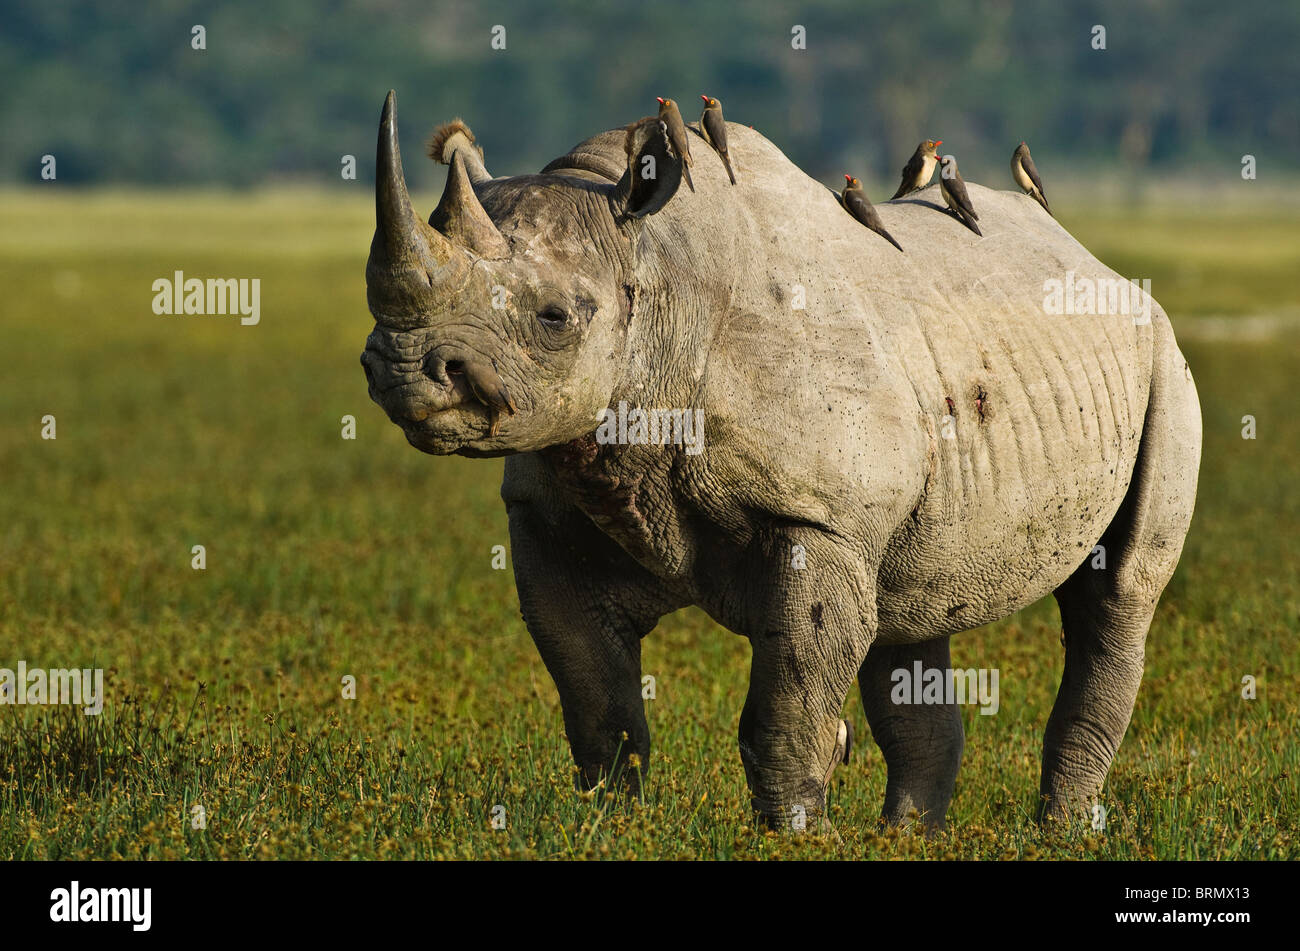 Black rhinoceros (Diceros bicornis michaeli) East African sub-species with red billed oxpeckers on its back Stock Photo